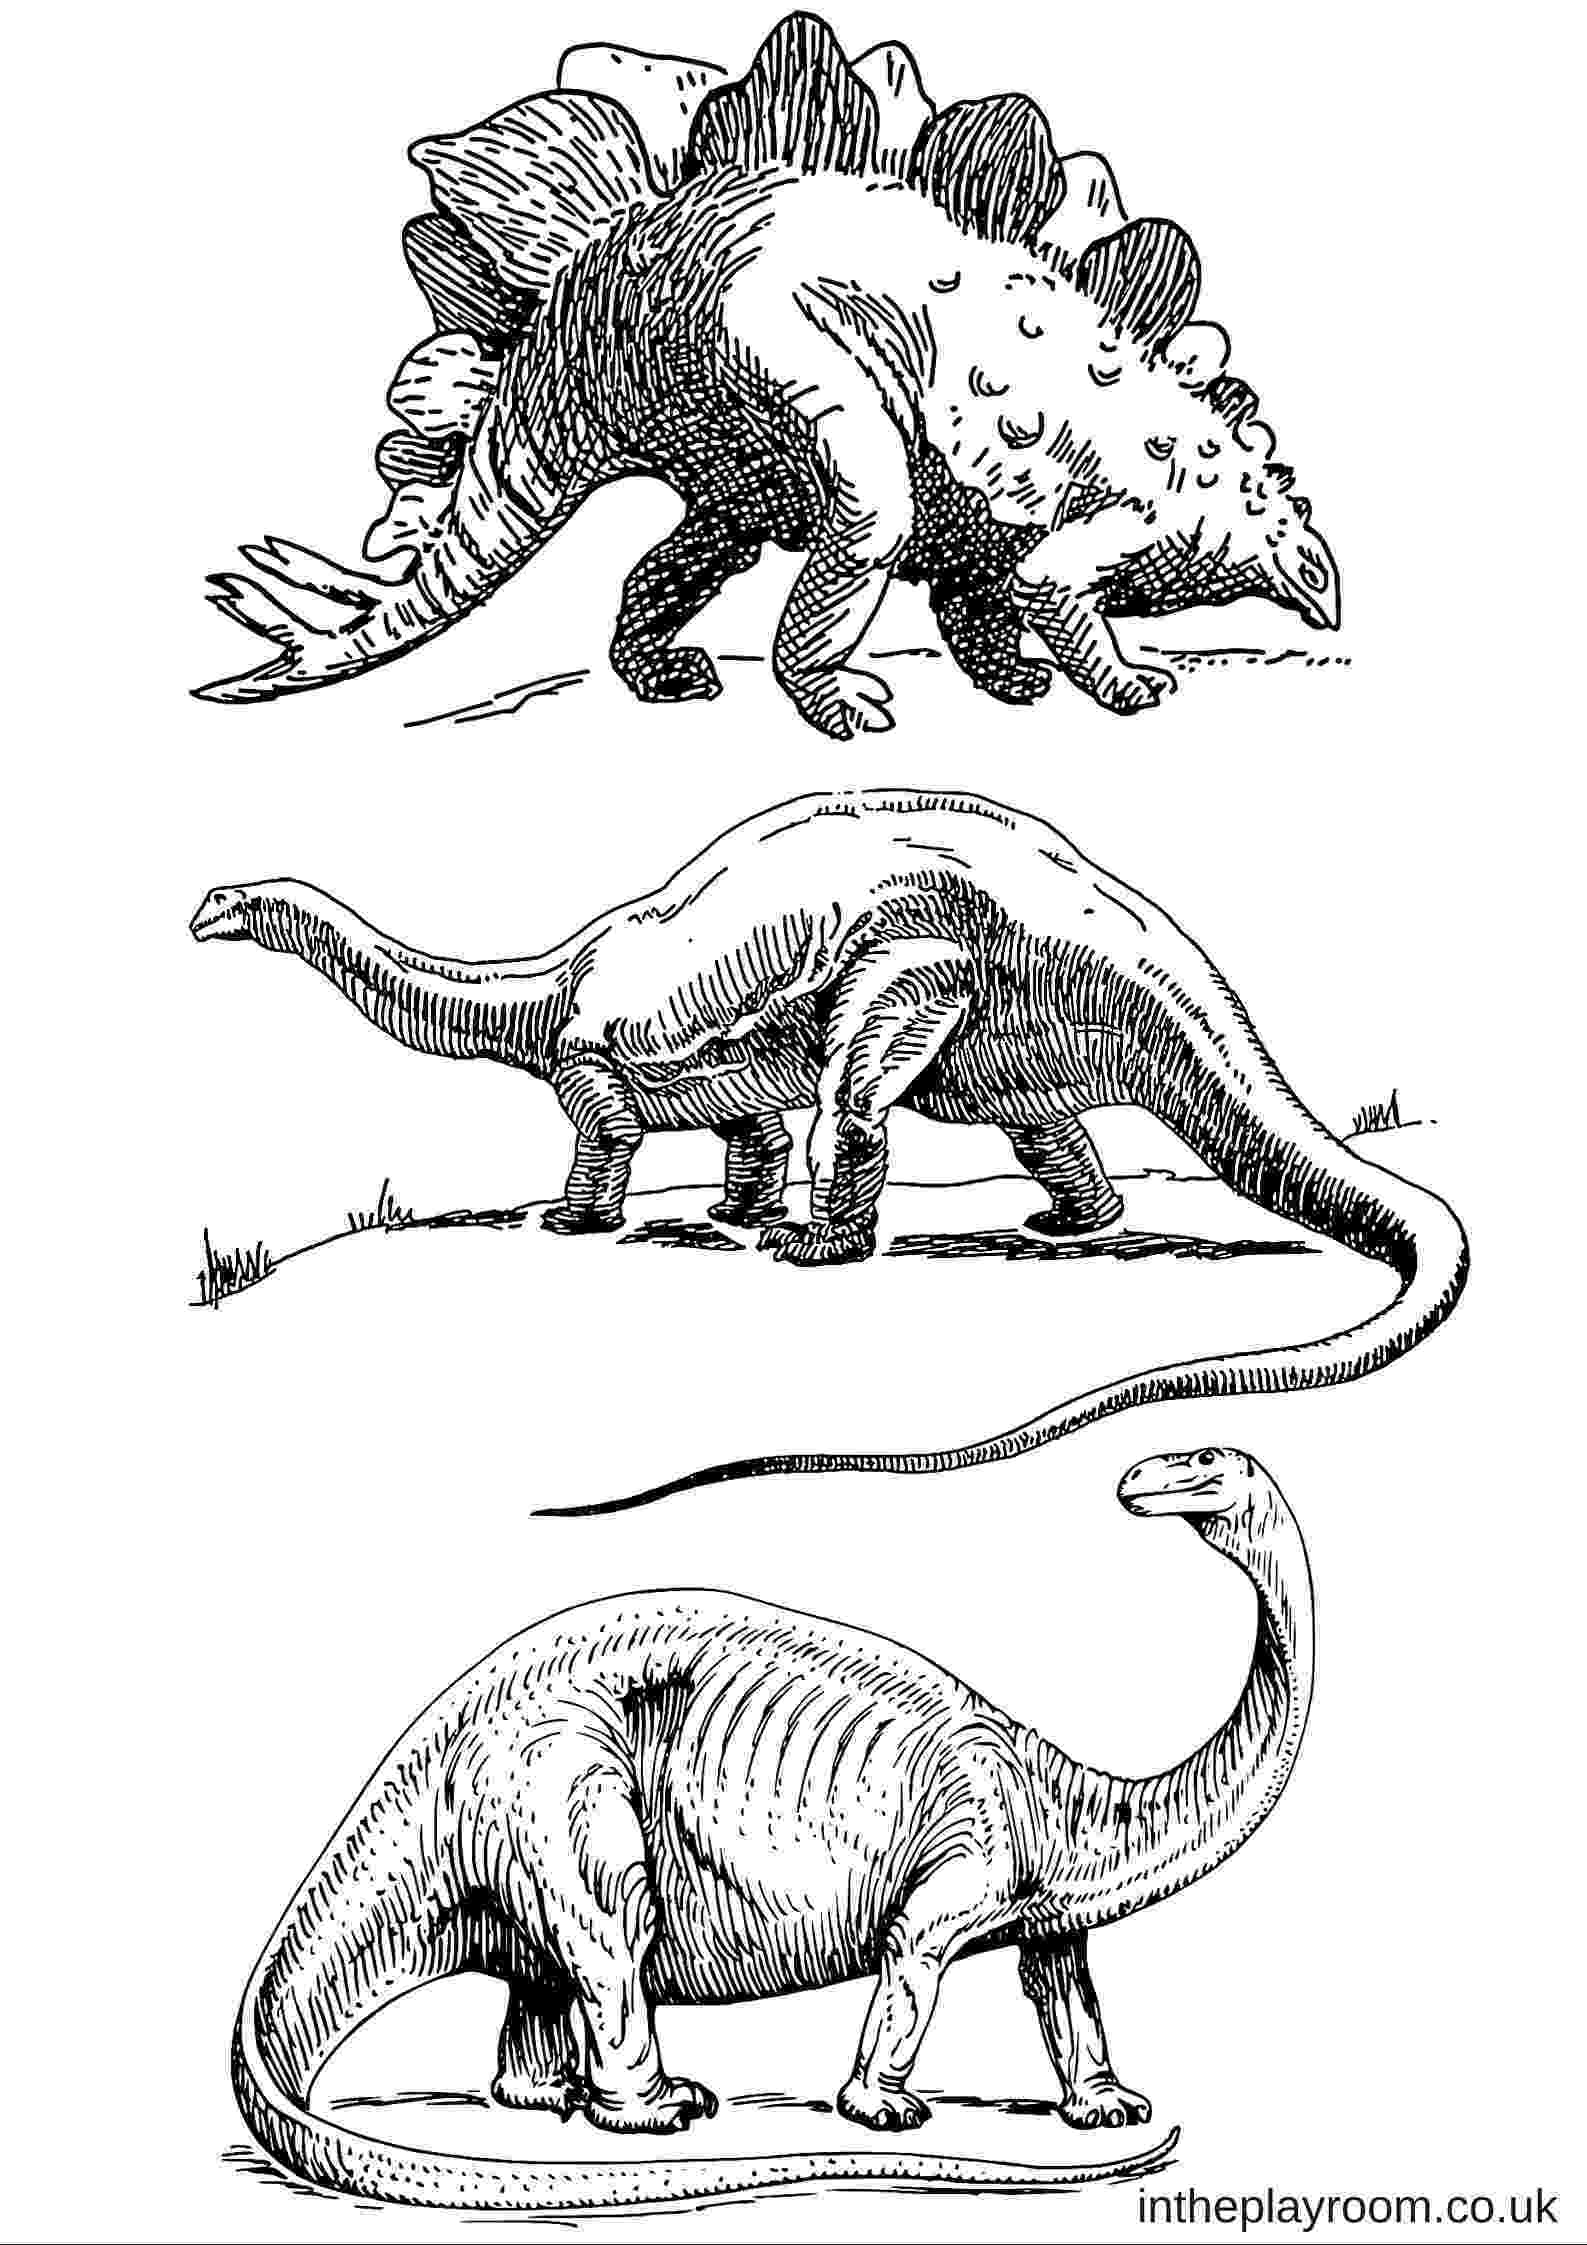 dinosaur colouring page dinosaur colouring pages in the playroom page colouring dinosaur 